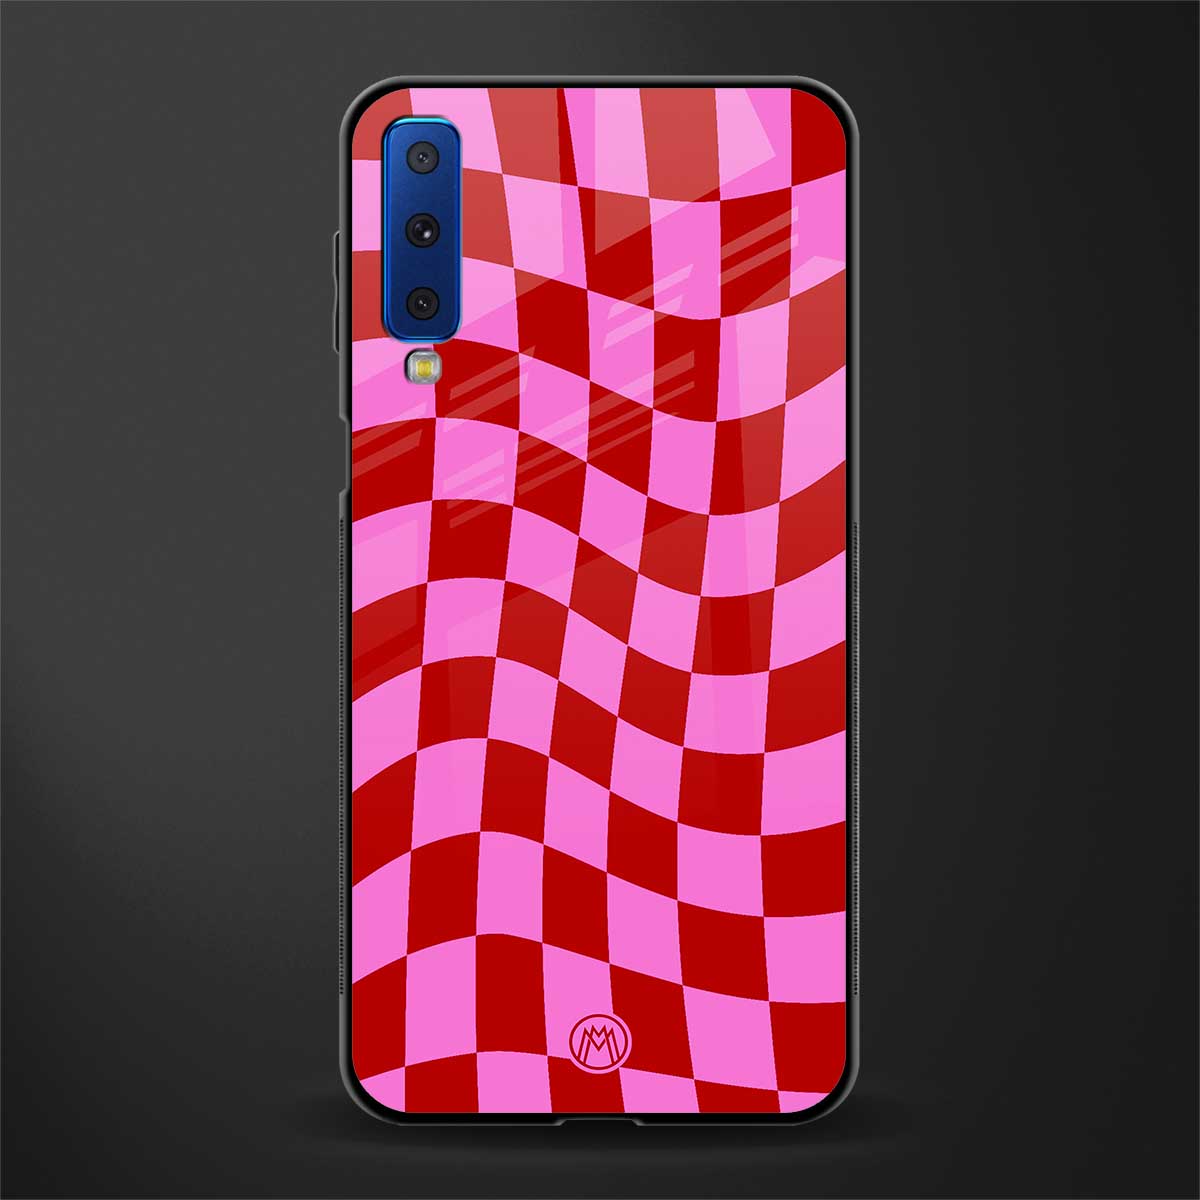 red pink trippy check pattern glass case for samsung galaxy a7 2018 image